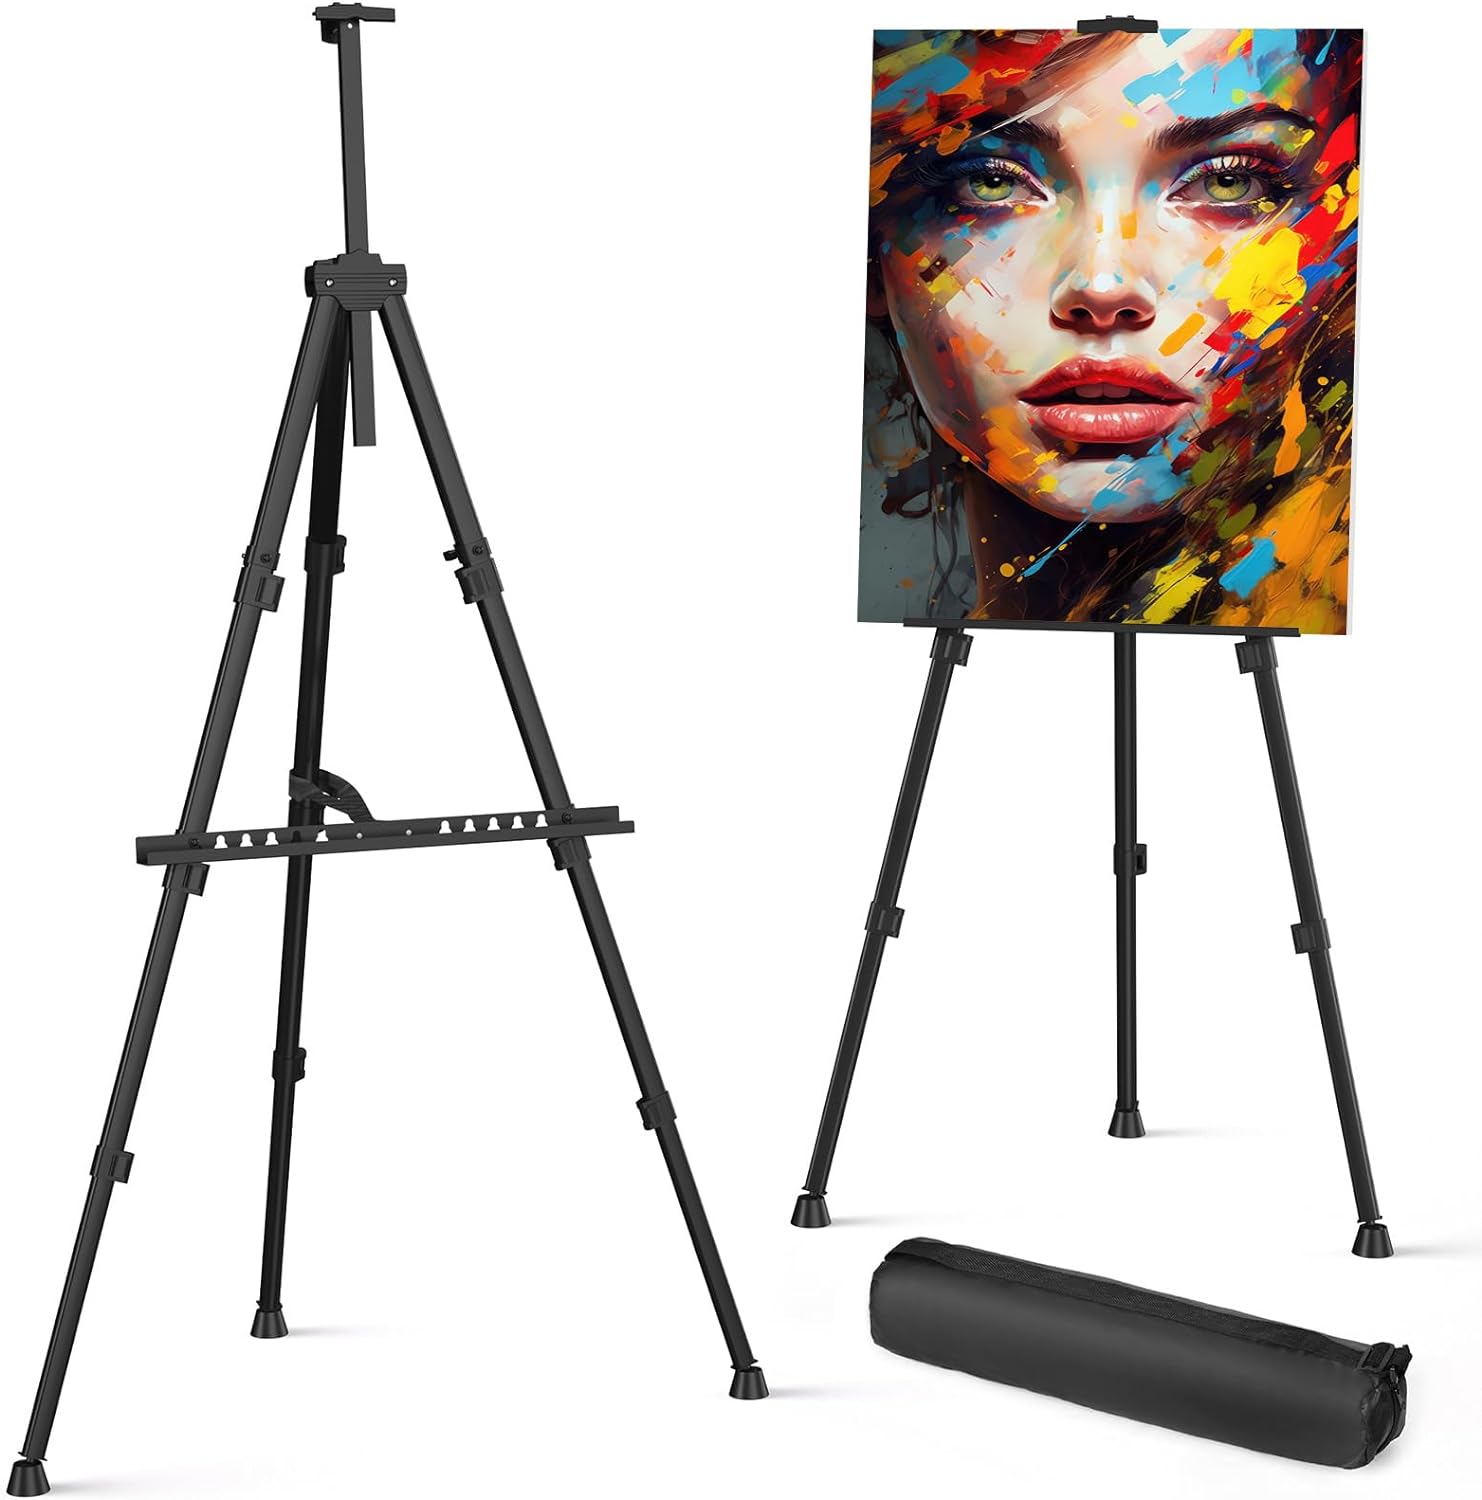  CONDA 6 Pack 16 Tabletop Display Easel, Portable A-Frame  Tripod Display Easel for Painting Party & Displaying Canvases, Photos,  Display Tripod Holder Stand for Students Kids Beginners : Toys & Games